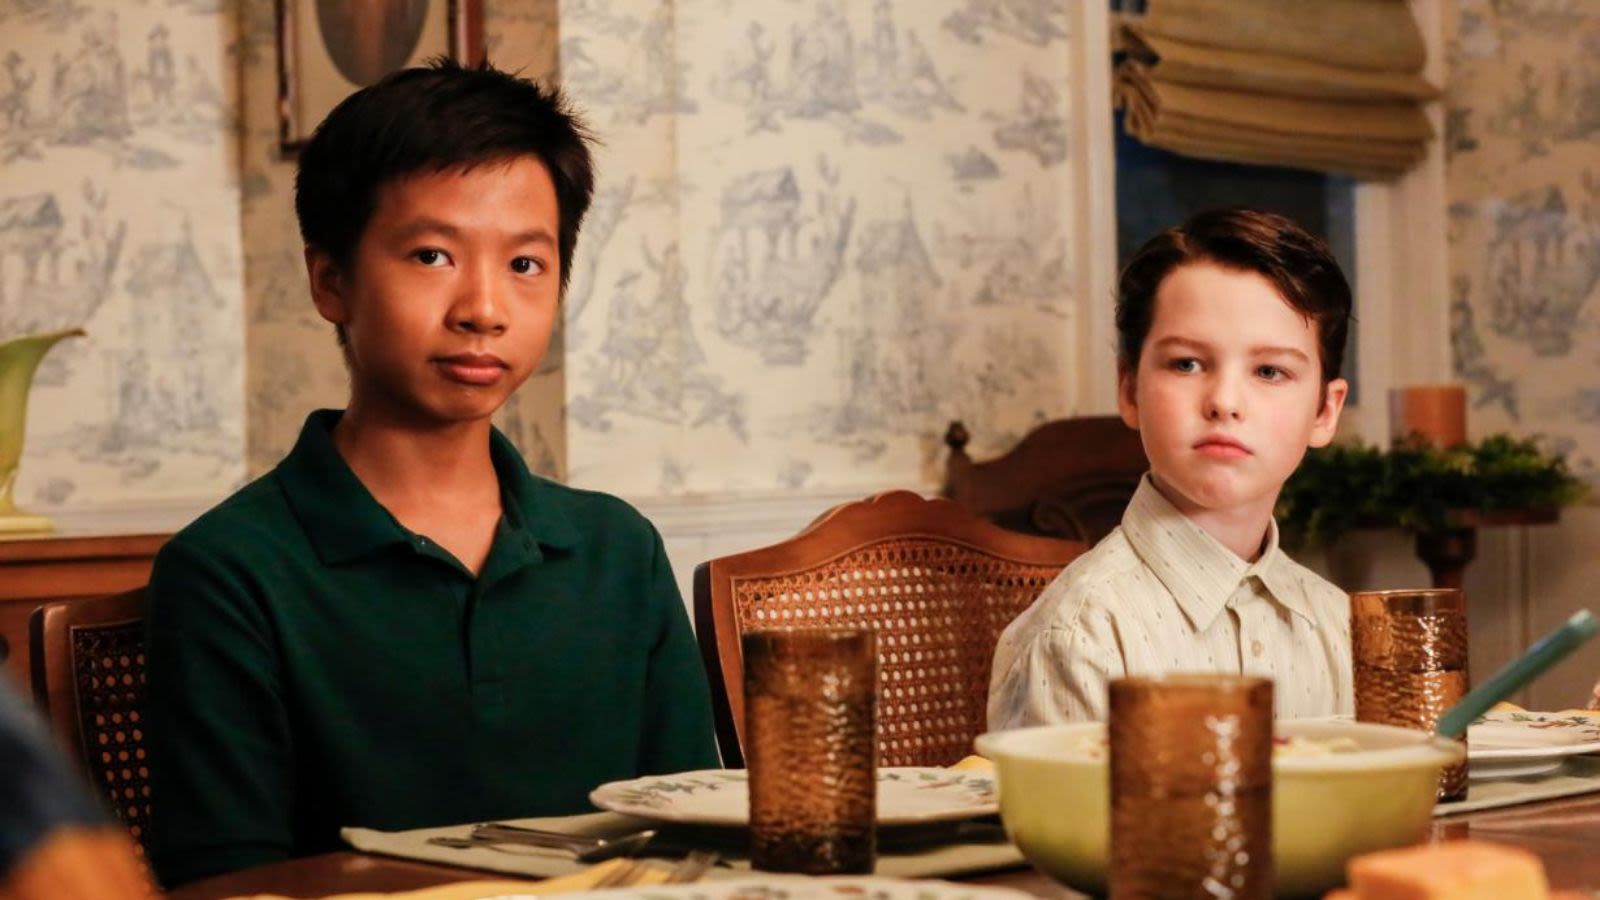 New Young Sheldon scene could solve frustrating Big Bang Theory plot hole - Dexerto